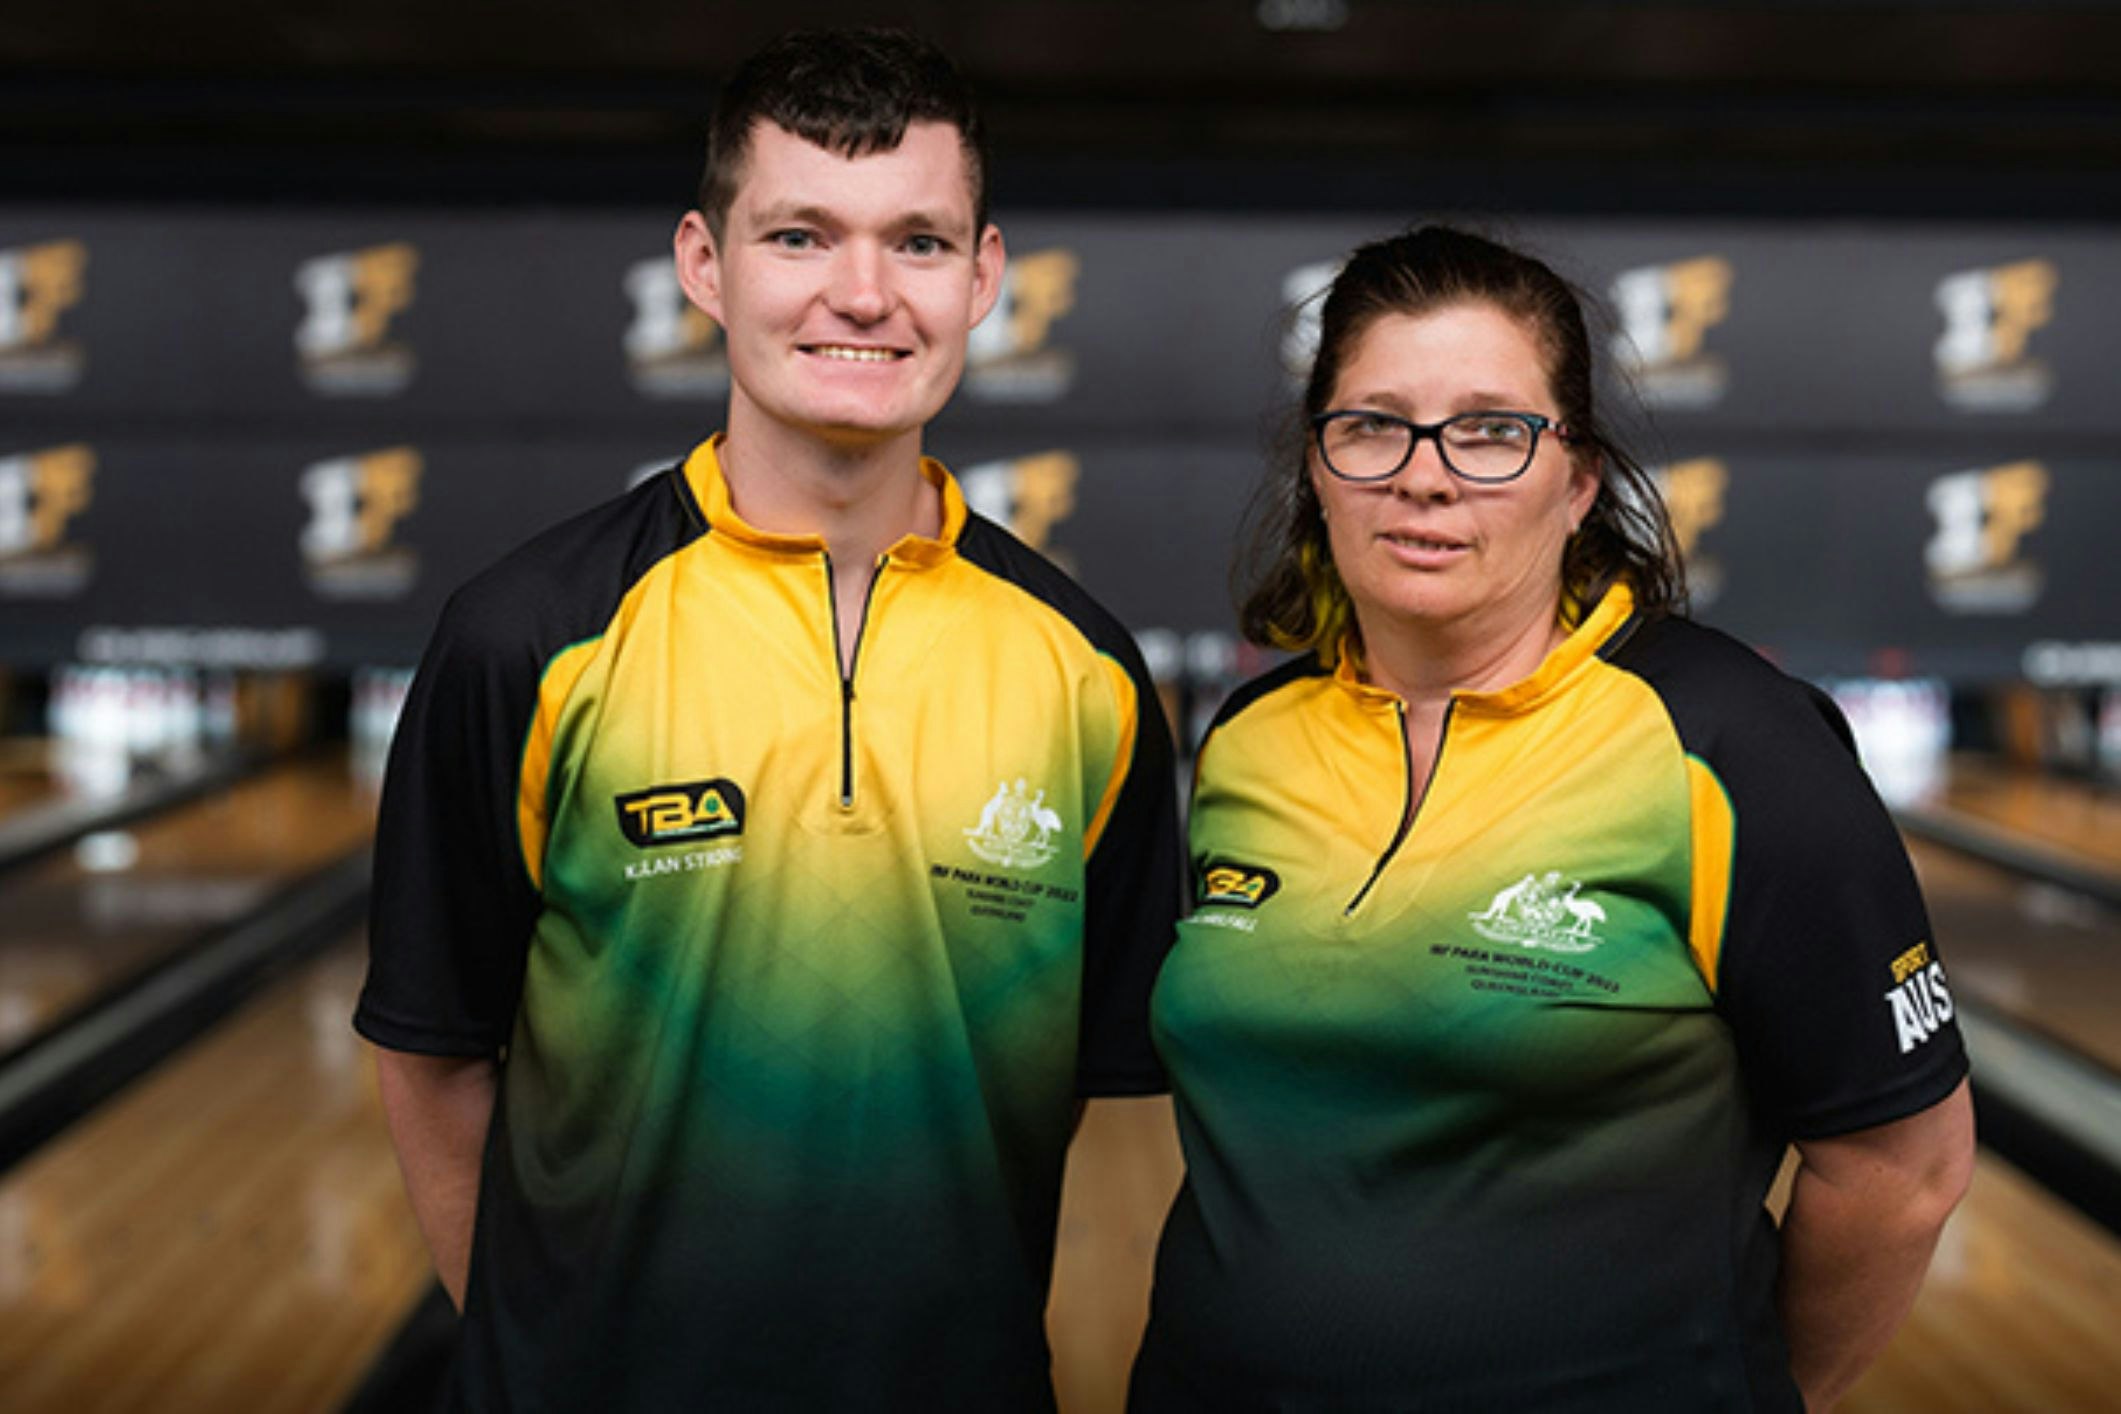 <p>Gold medallists Kallan Strong (Sportsperson of the Year with a Disability 2022) and Amanda Threlfall (2022 Para Bowling World Cup champion) are in attendance at one of the biggest disability sporting events in Australia. (Source: Tenpin Bowling Australia)</p>
